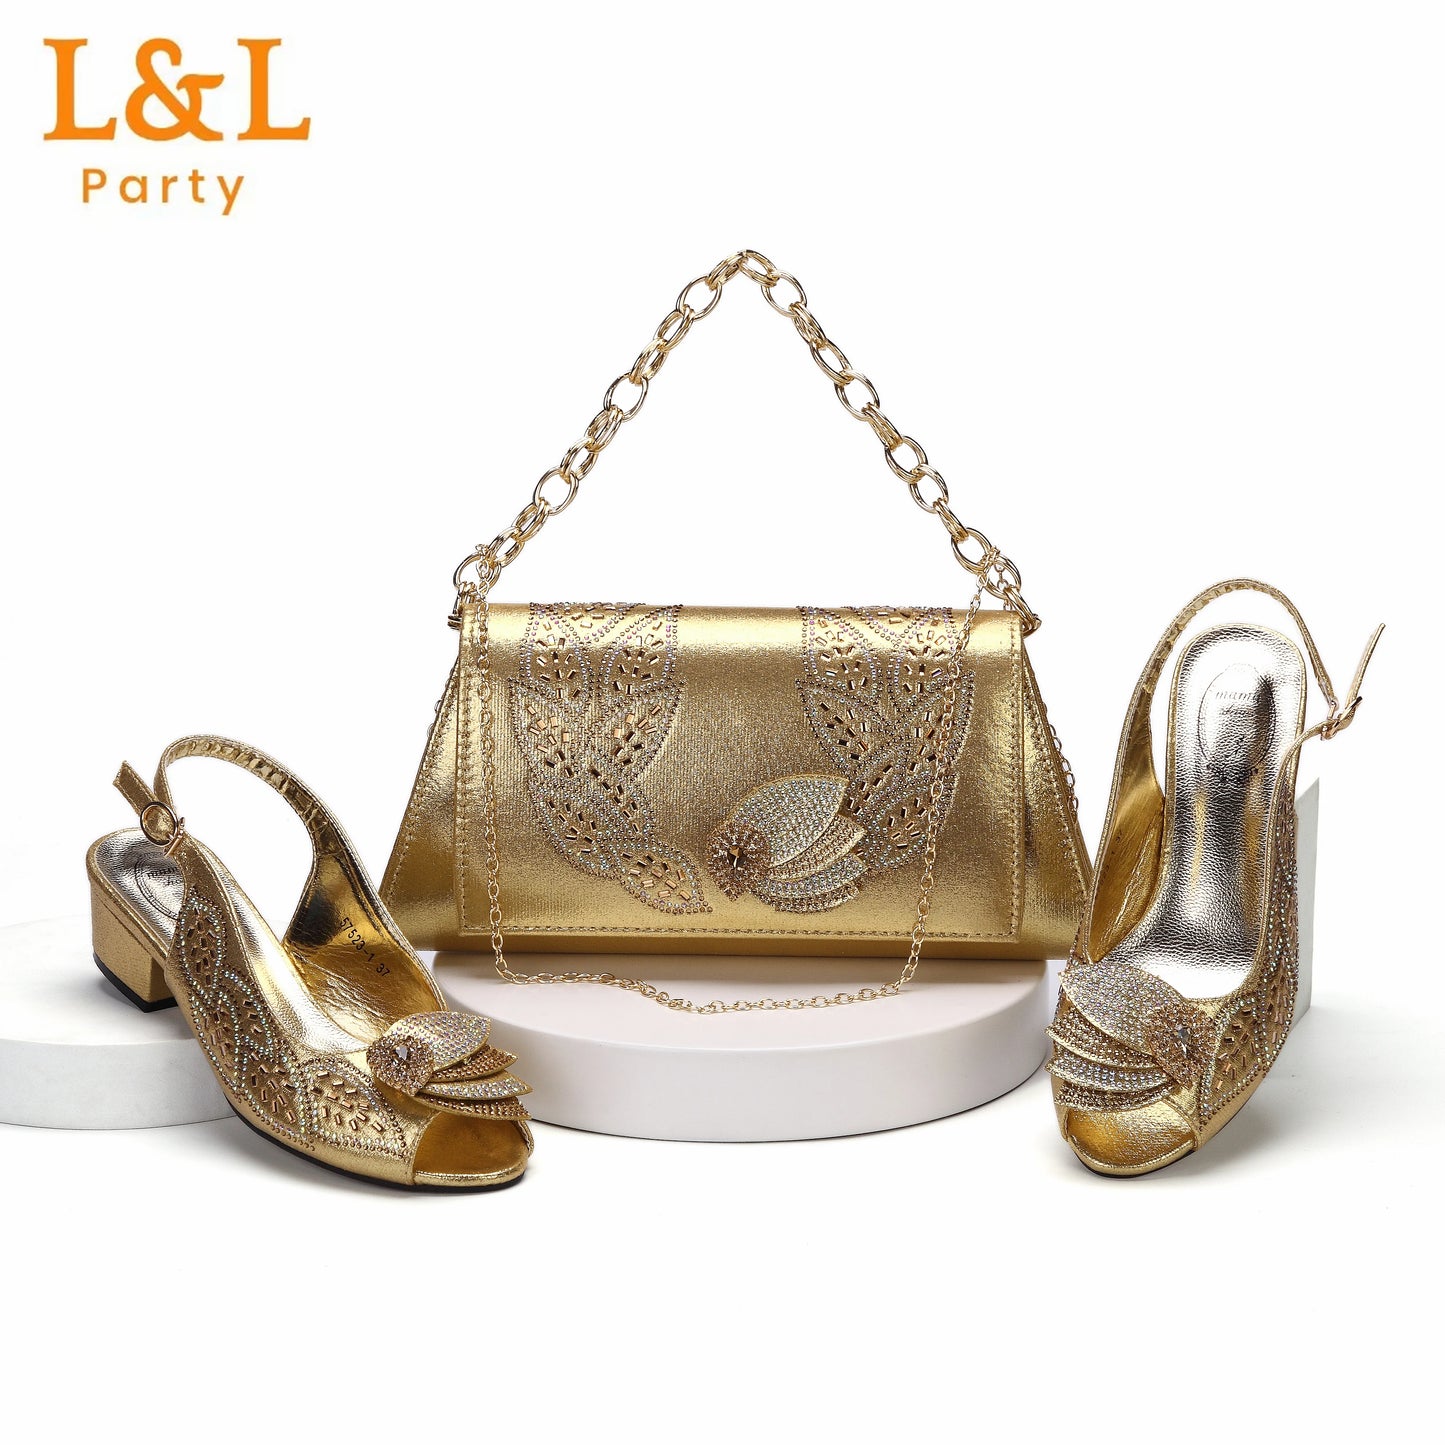 2024 High Quality Low Heels Ladies Sandals Leaf Design Shoes Matching Bag Set in Gold Color For Party